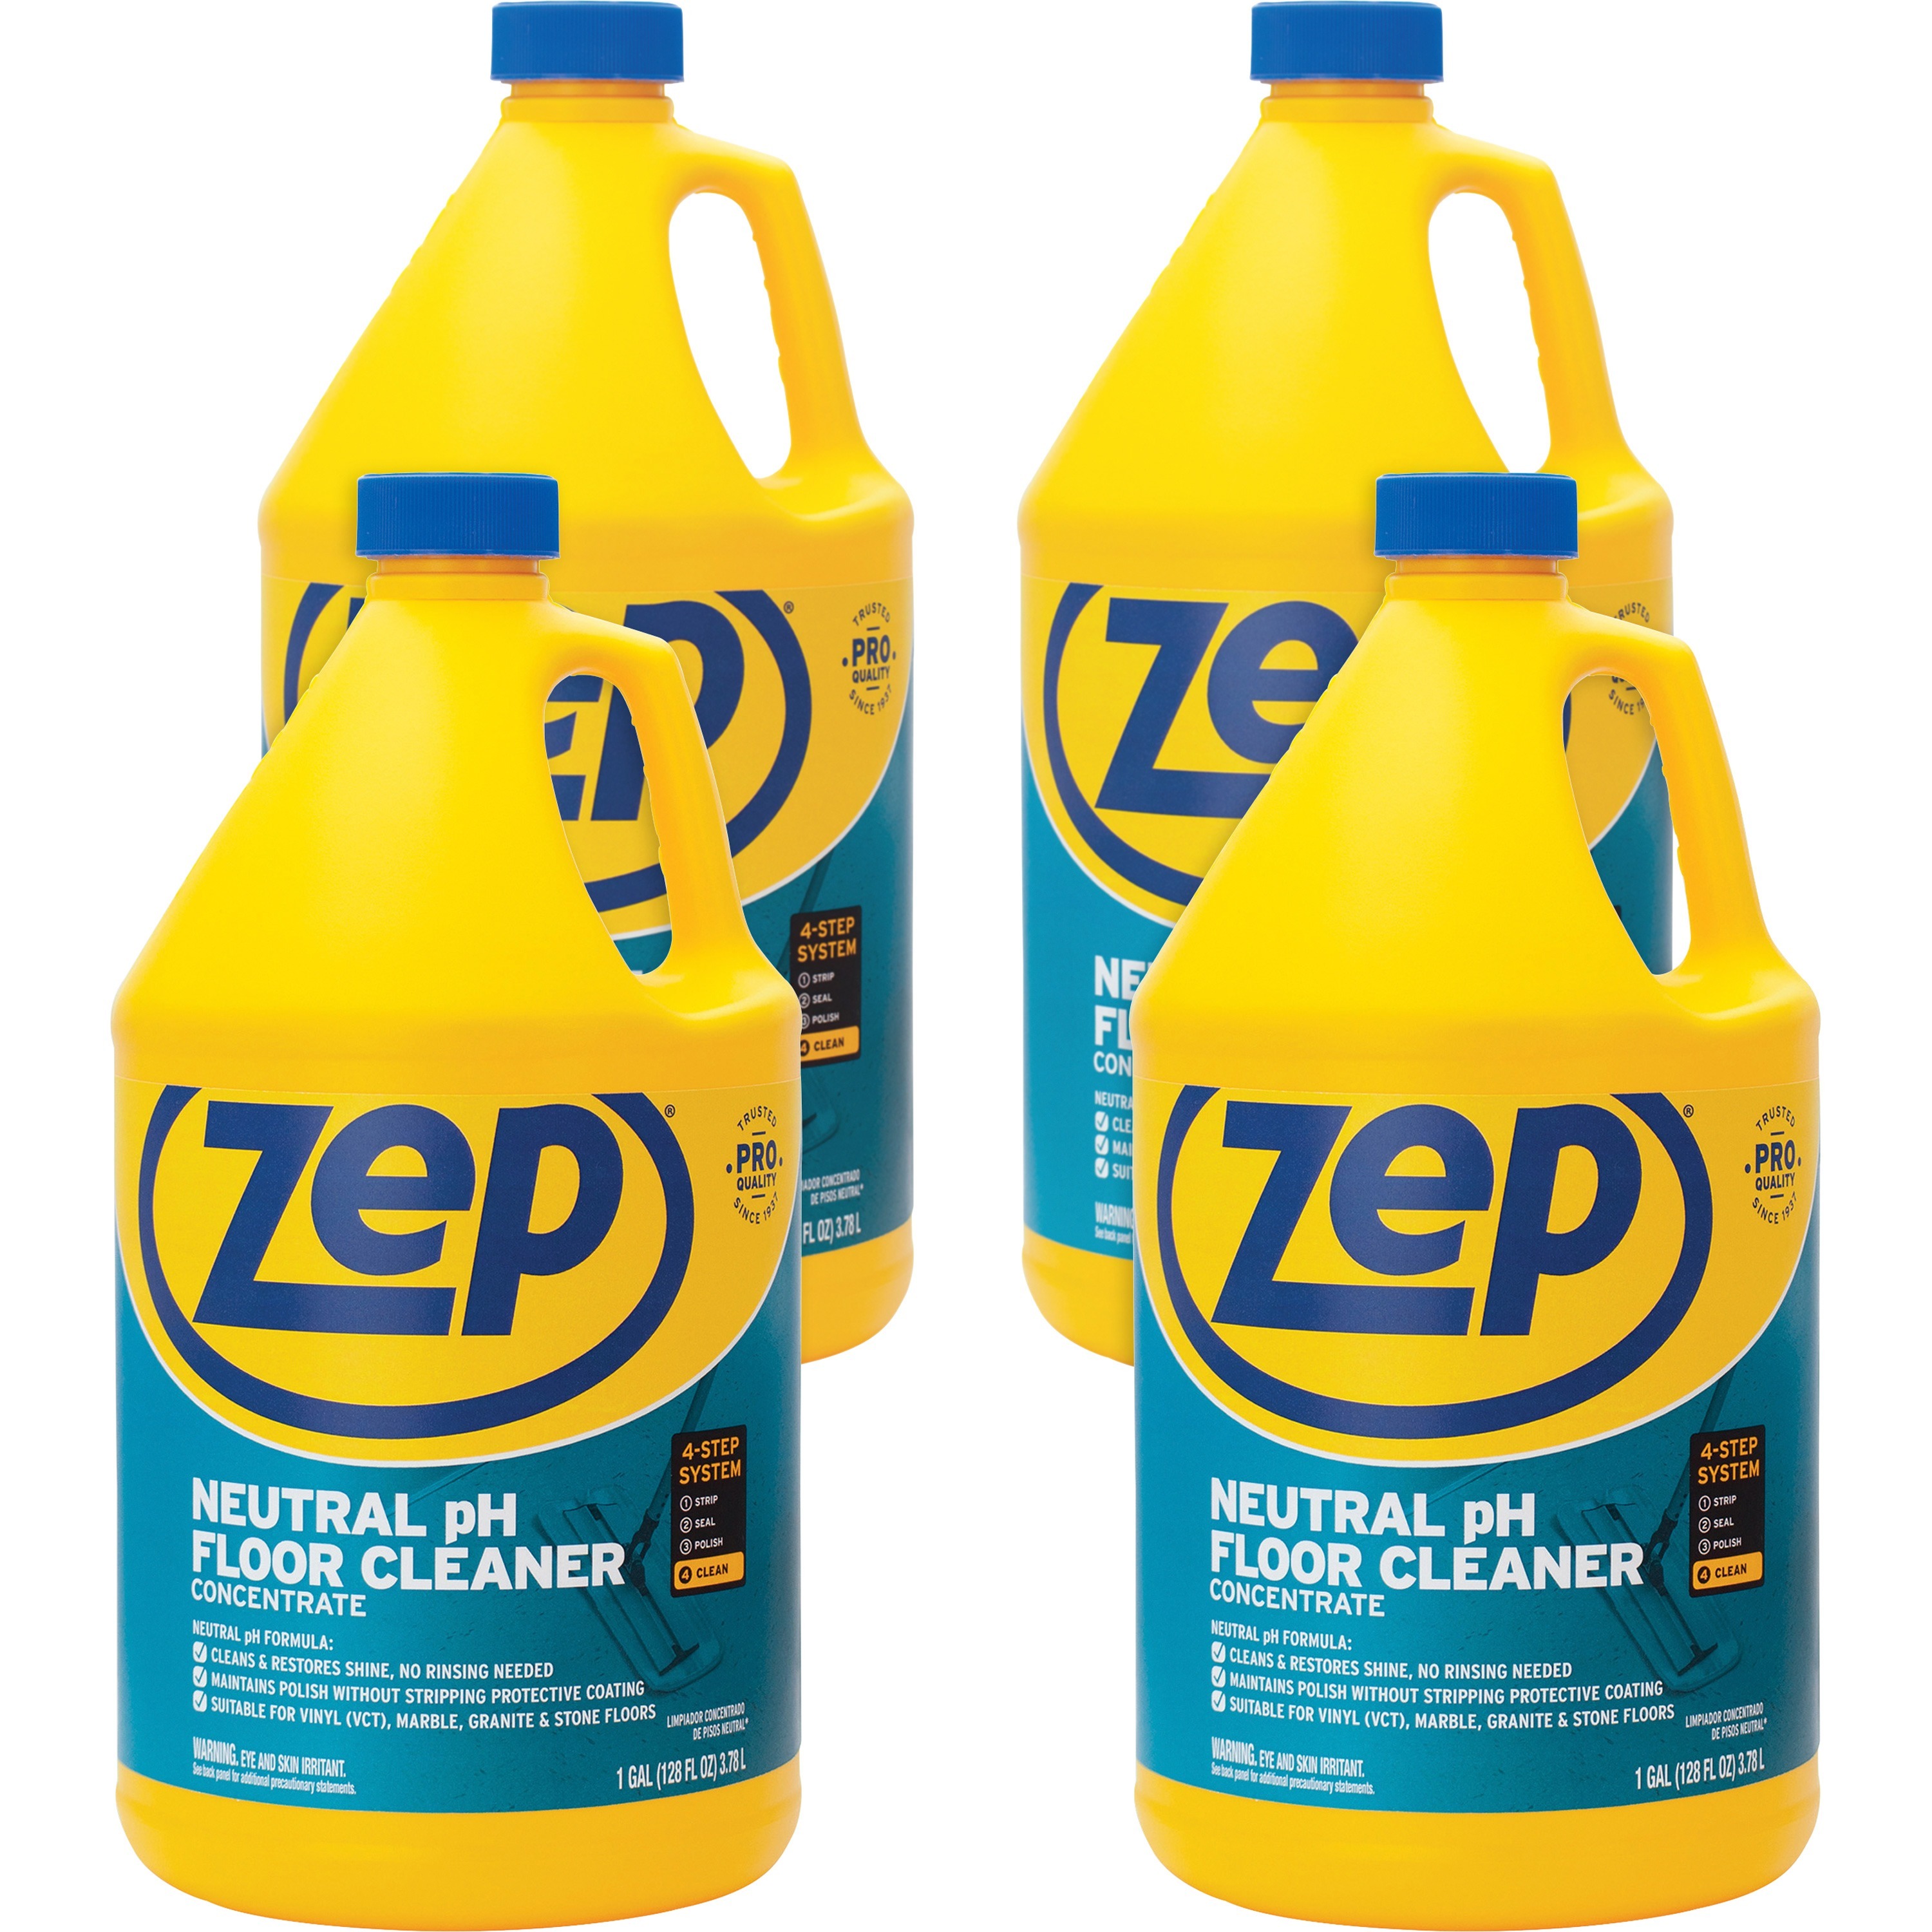 Zep Concentrated Neutral Floor Cleaner